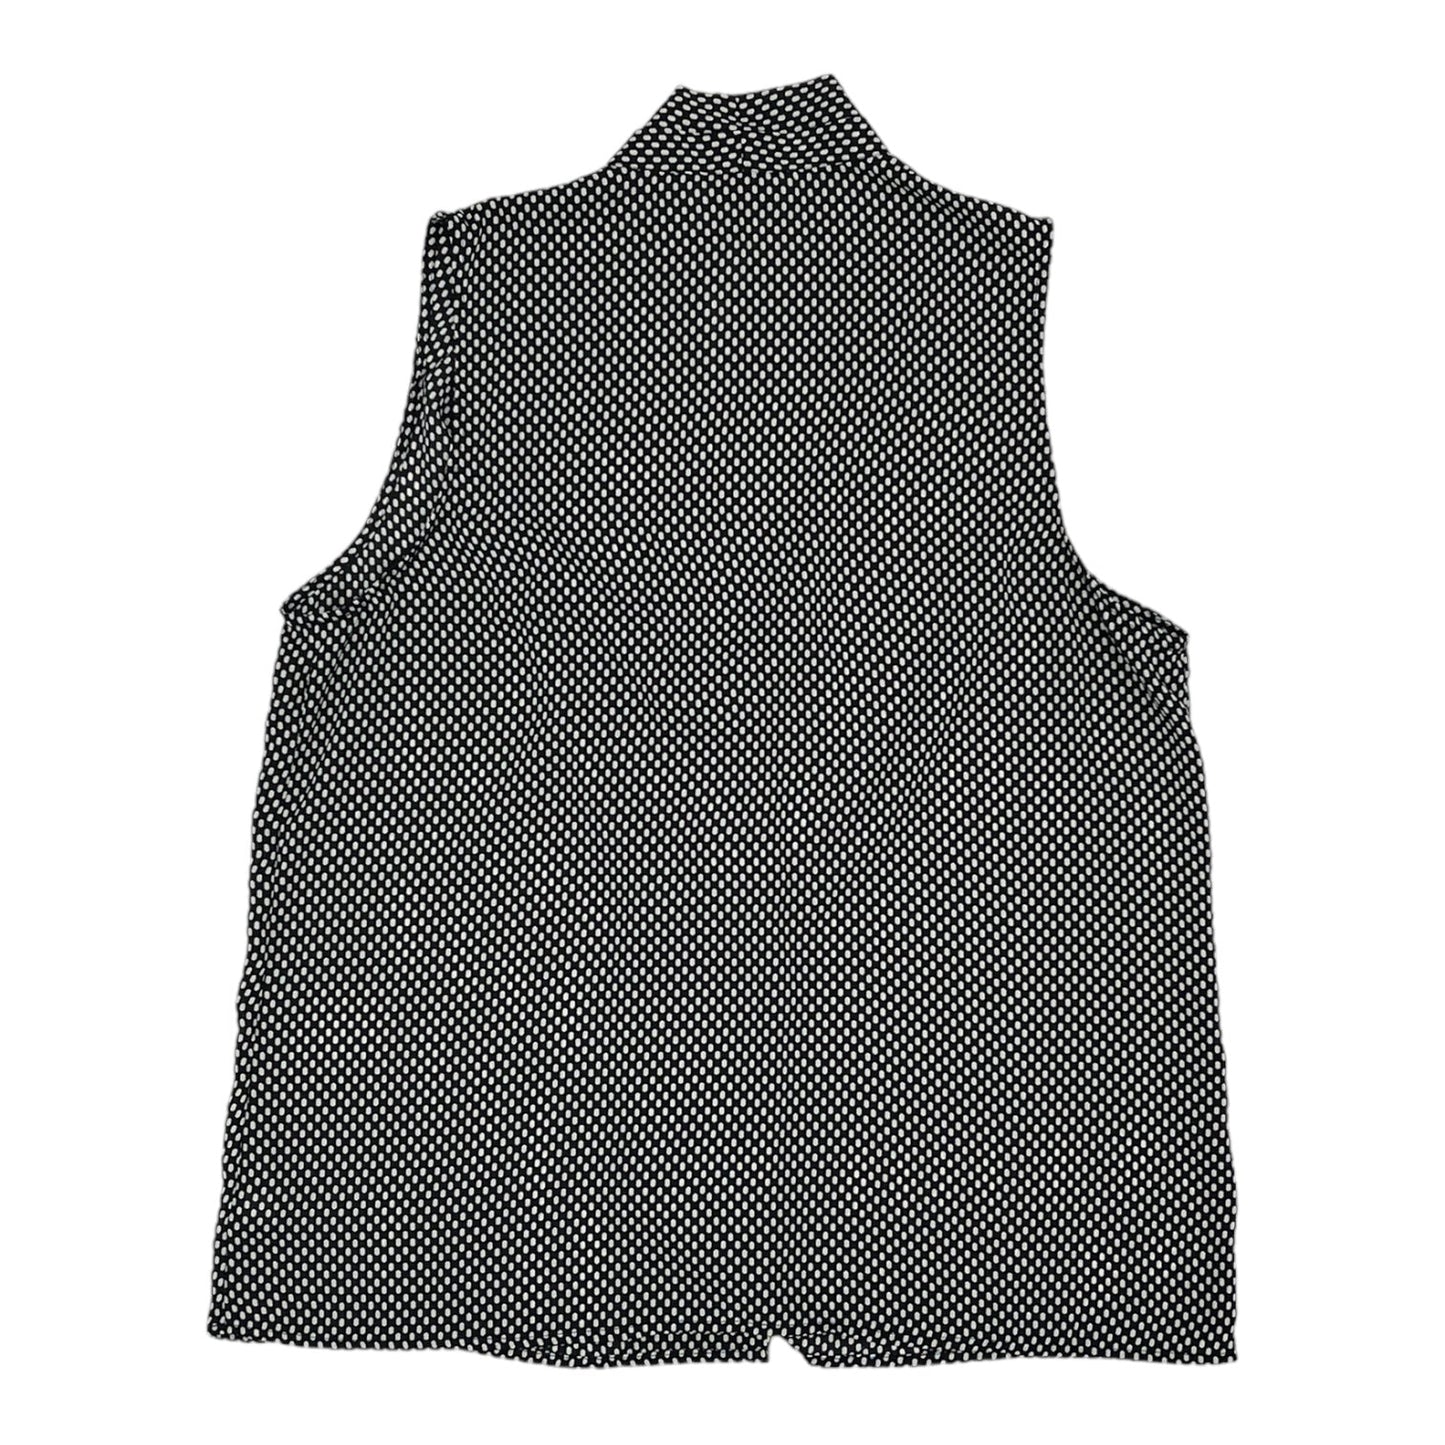 BLACK & WHITE BLOUSE SLEEVELESS by WHO WHAT WEAR Size:XL